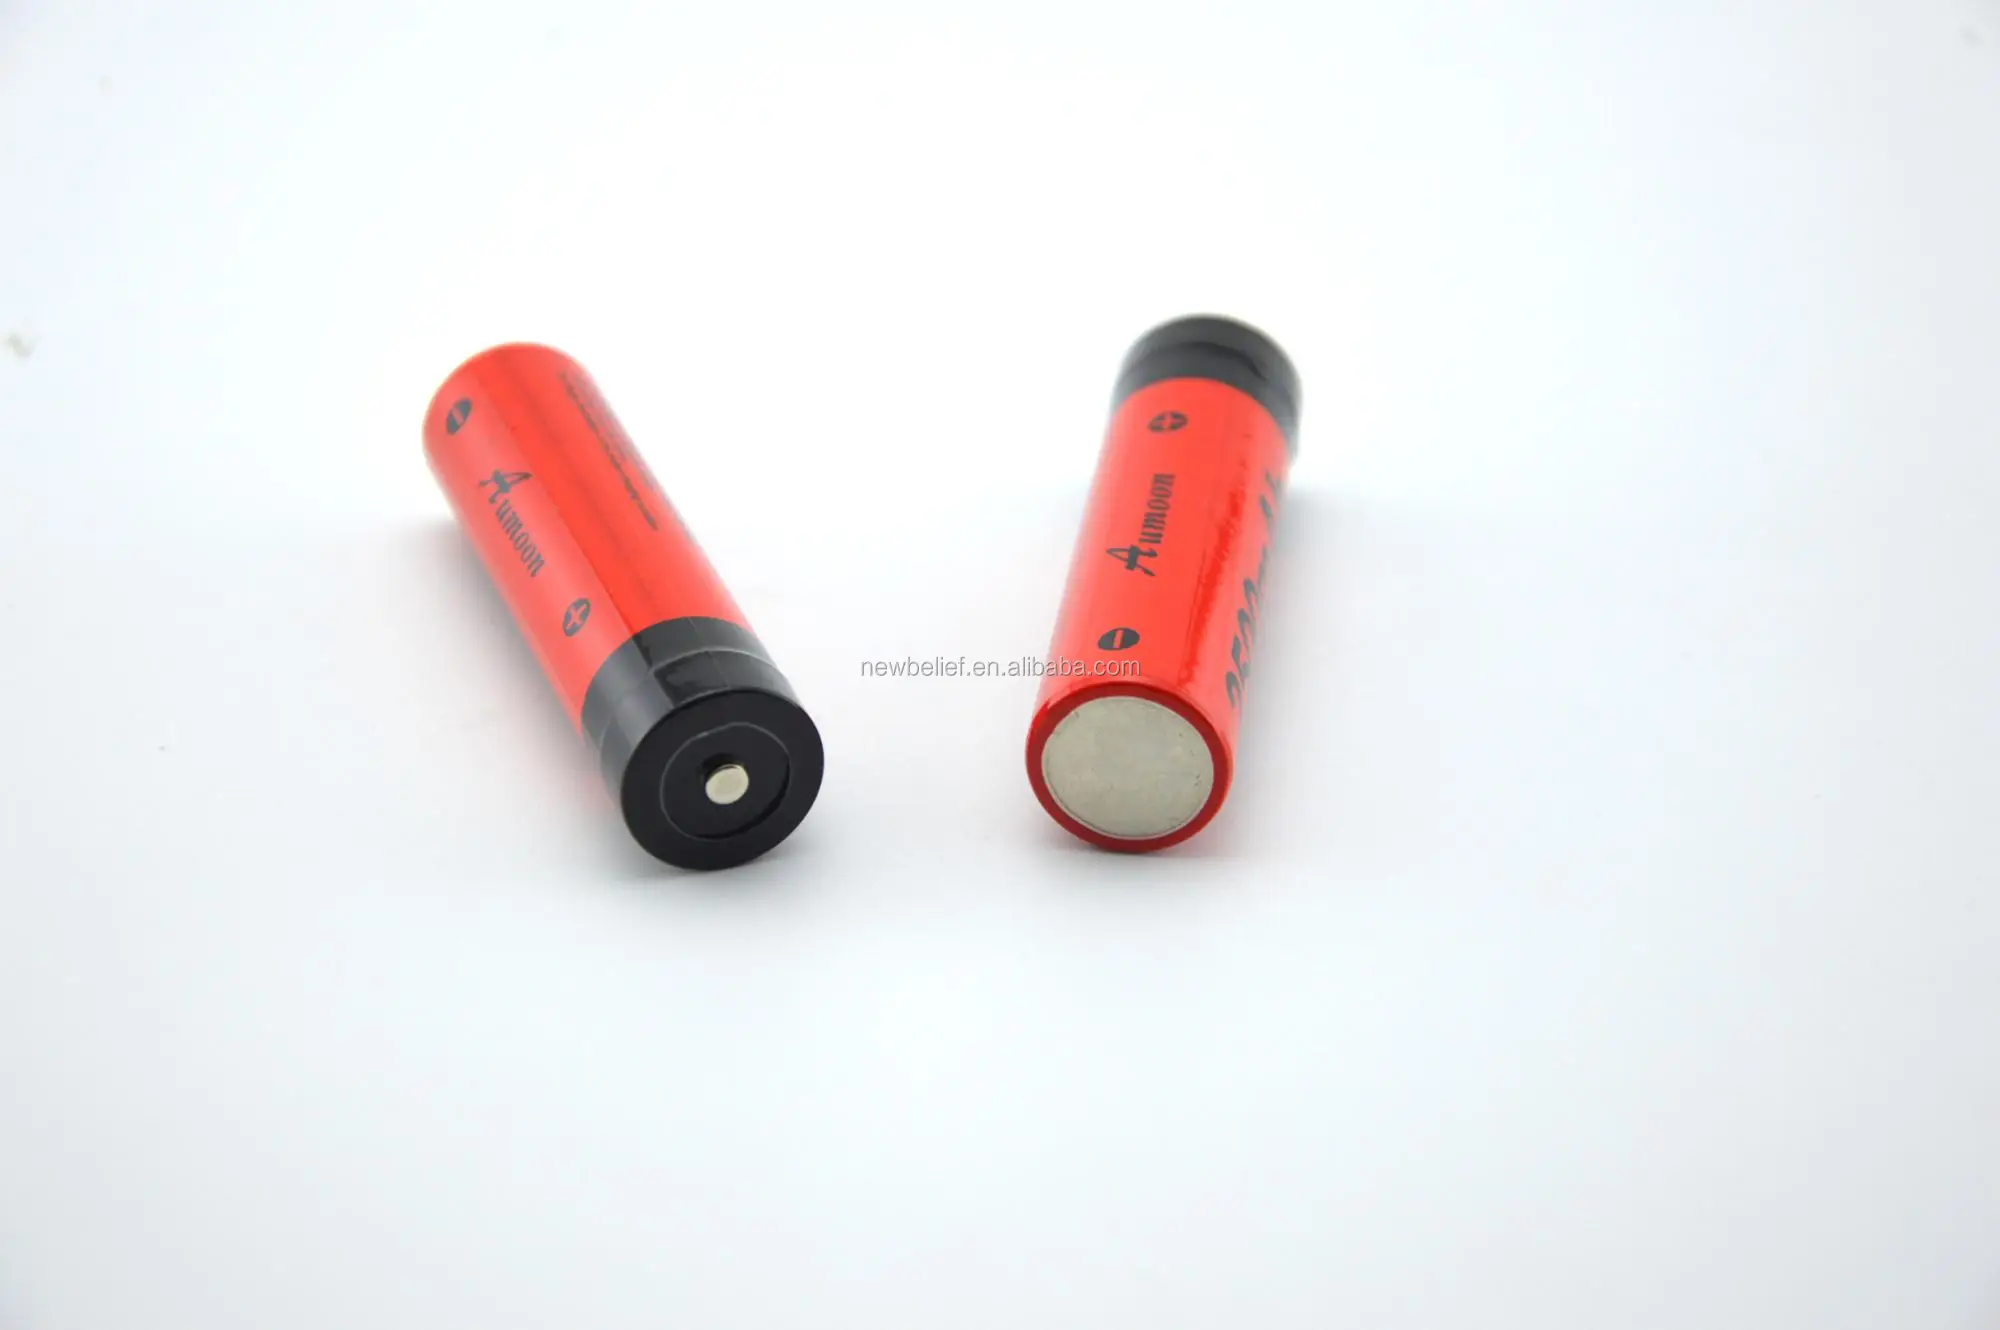 18650 rechargeable battery